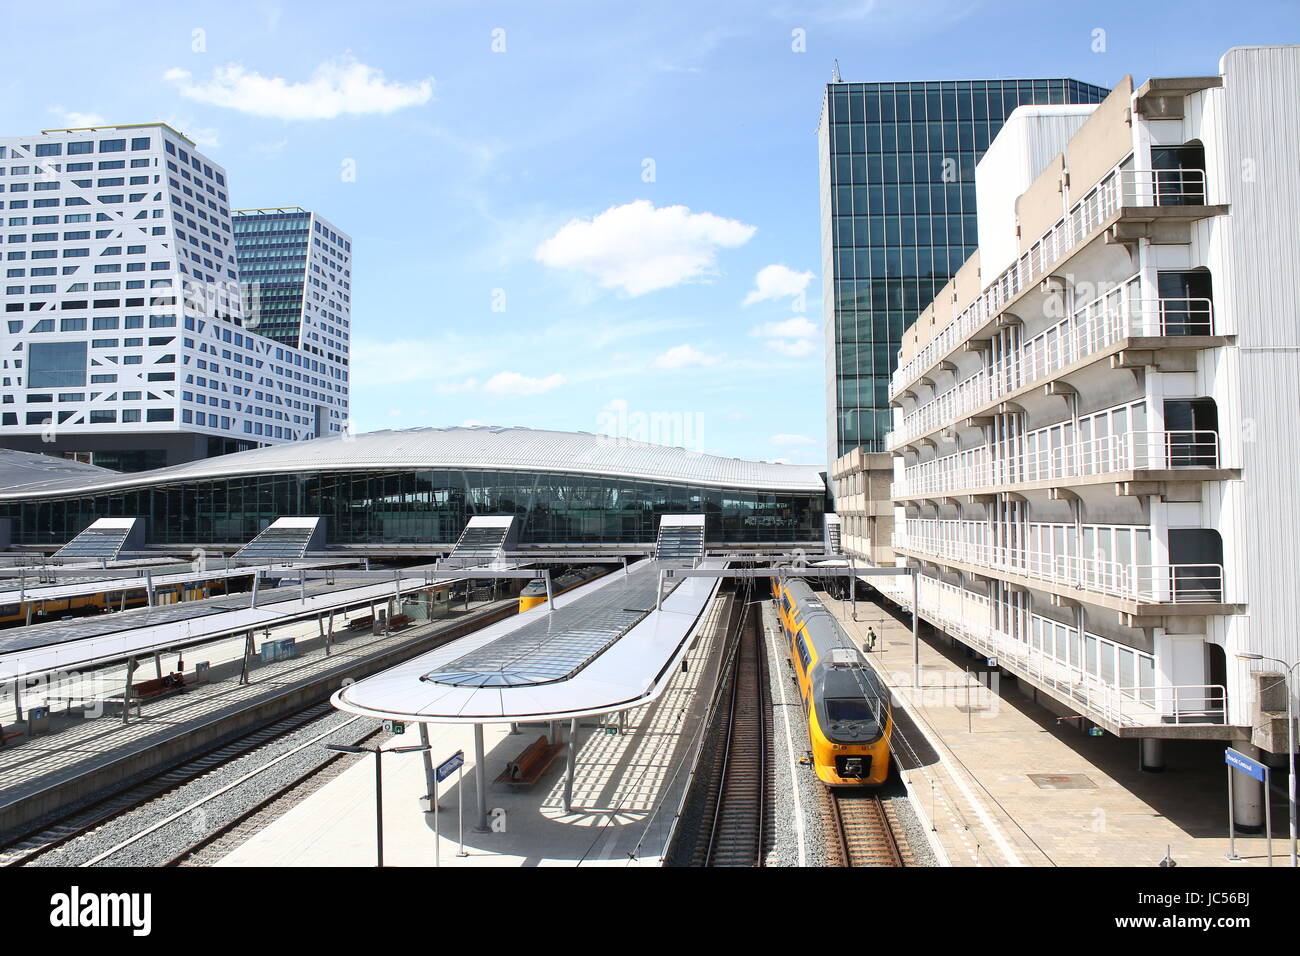 Platforms at Utrecht Centraal Main railway station, viewed from the new